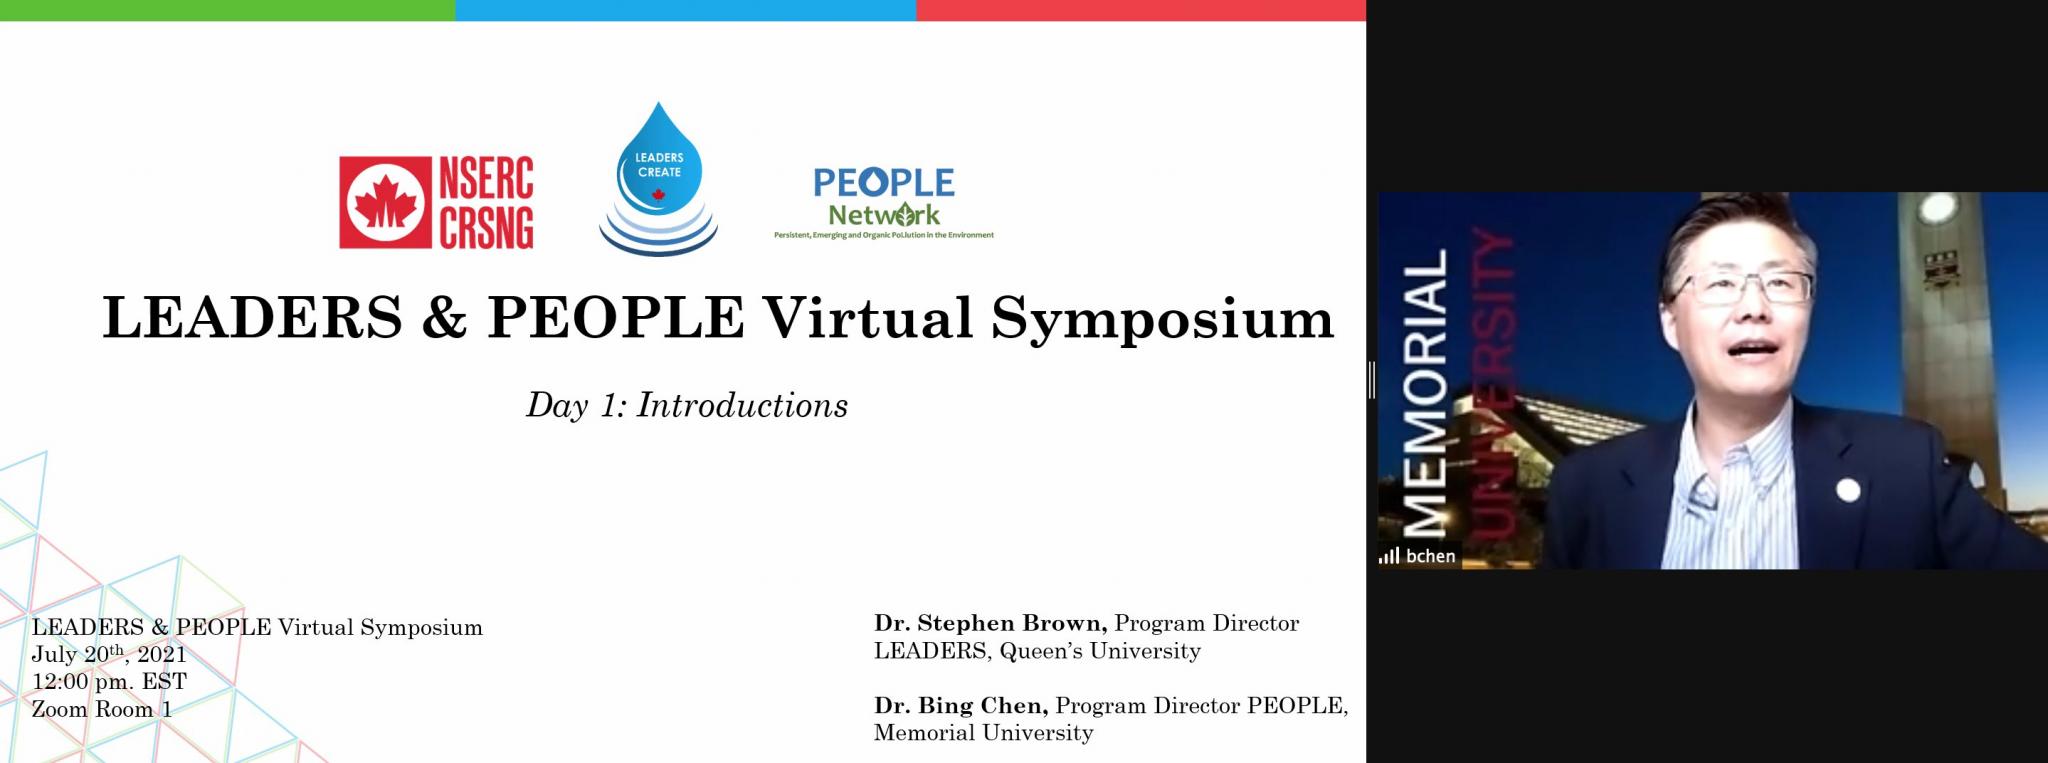 Dr. Bing Chen, Director of the PEOPLE Network welcomes attendees to the 2021 LEADERS & PEOPLE Symposium